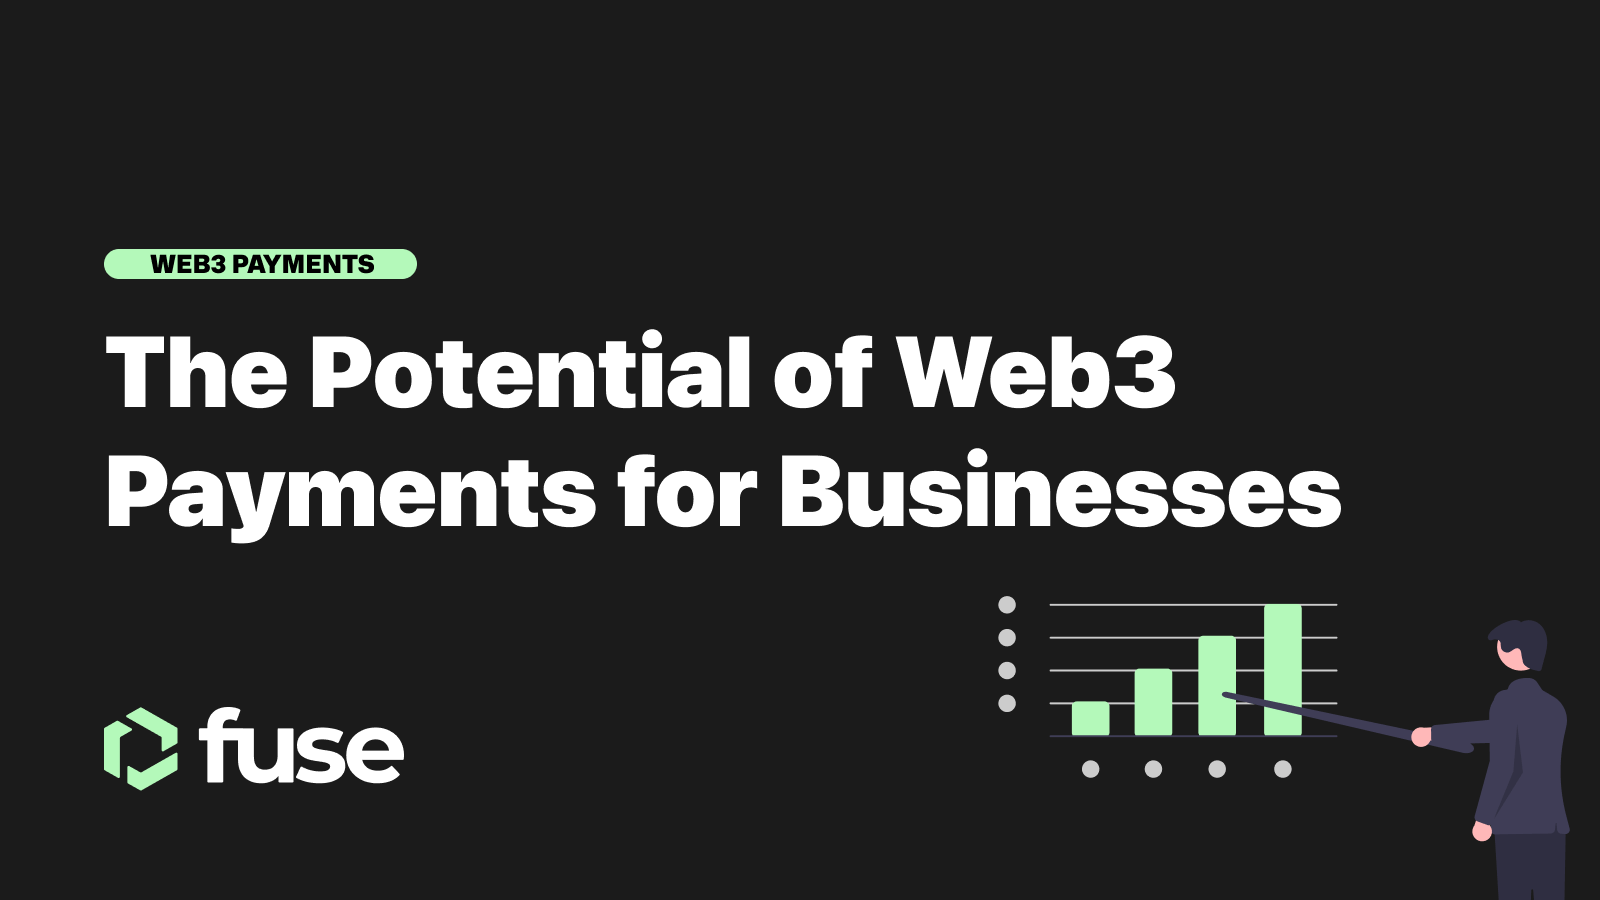 Web3 Payments for Businesses